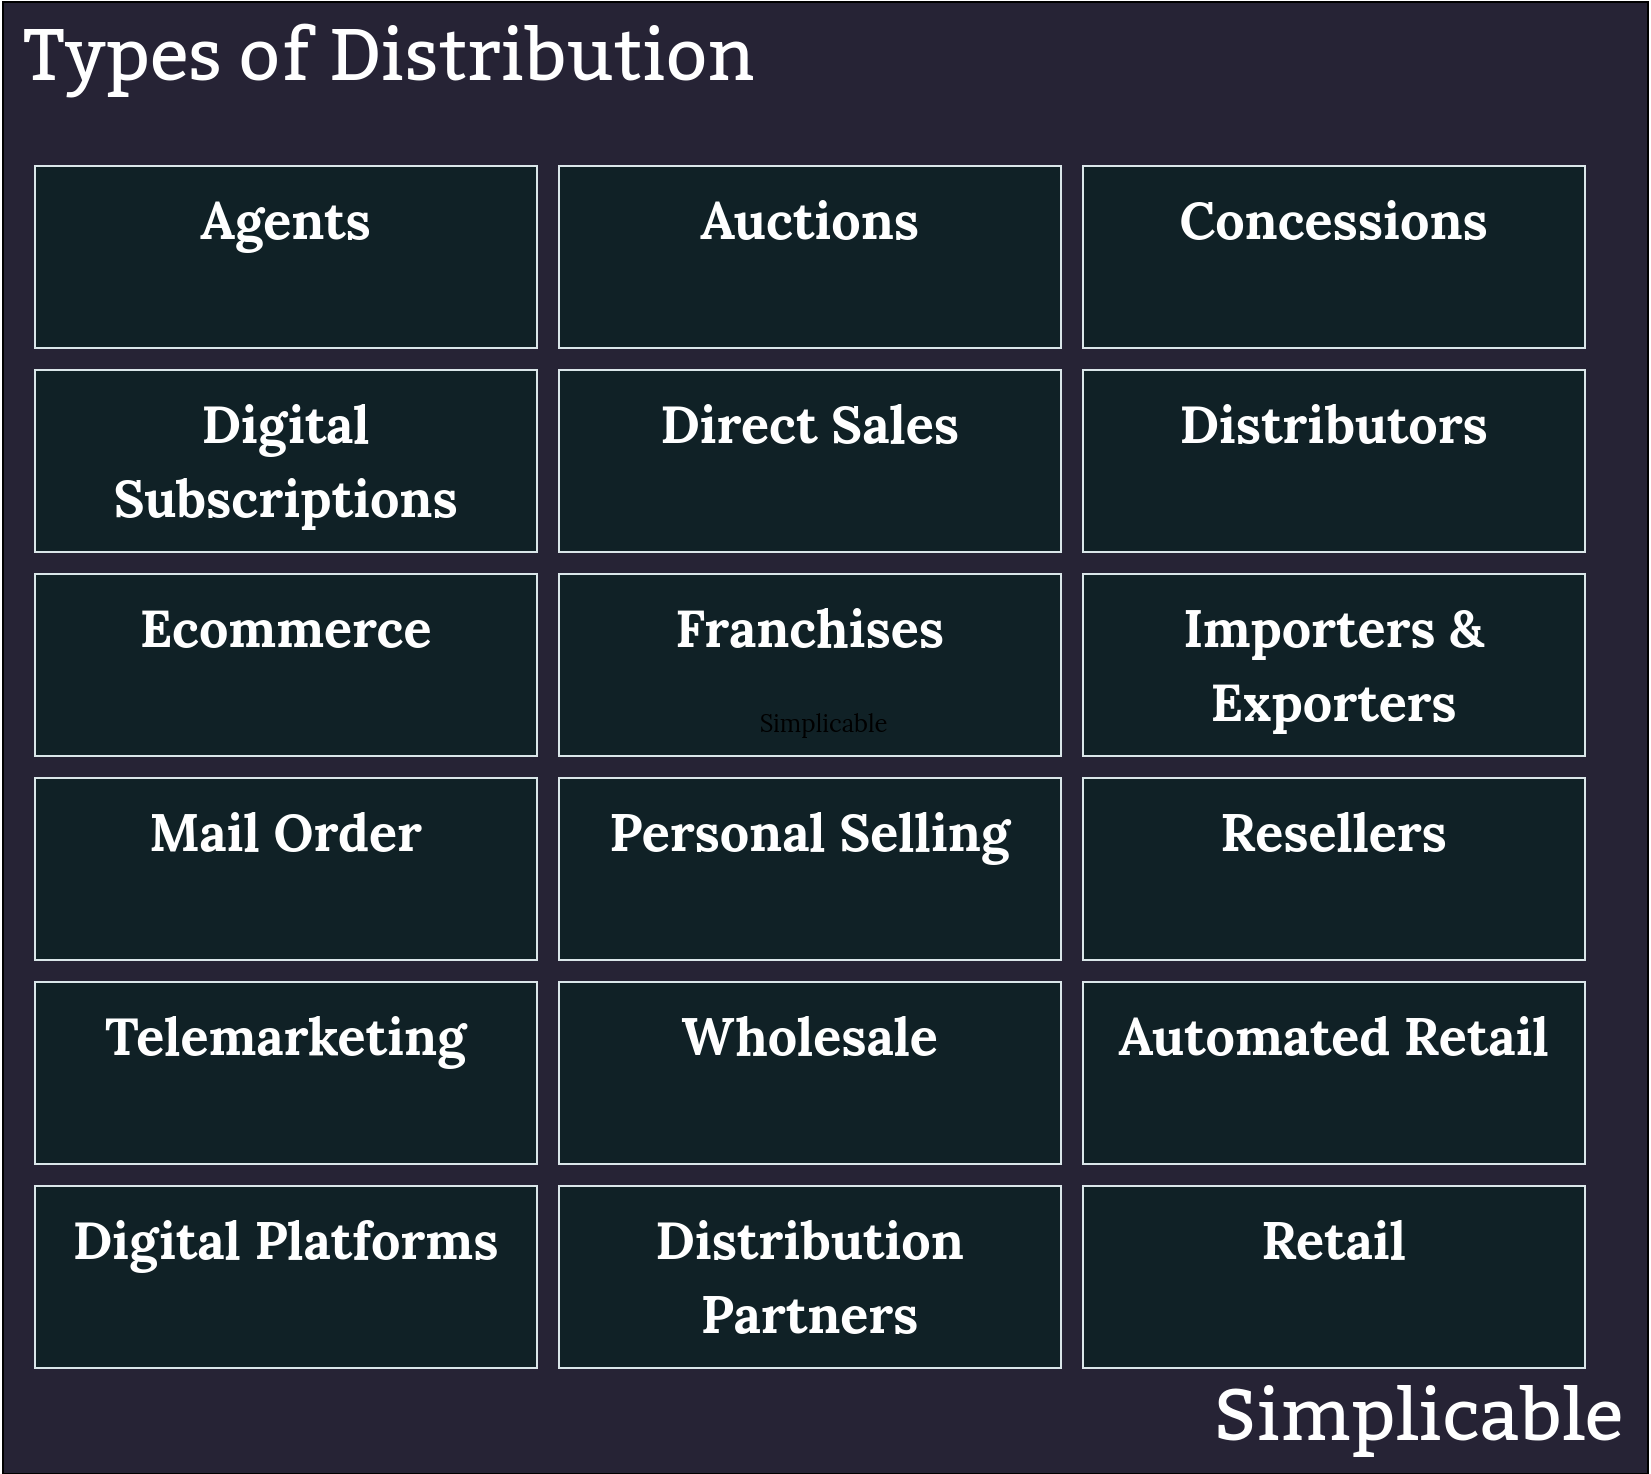 types of distribution simplicable